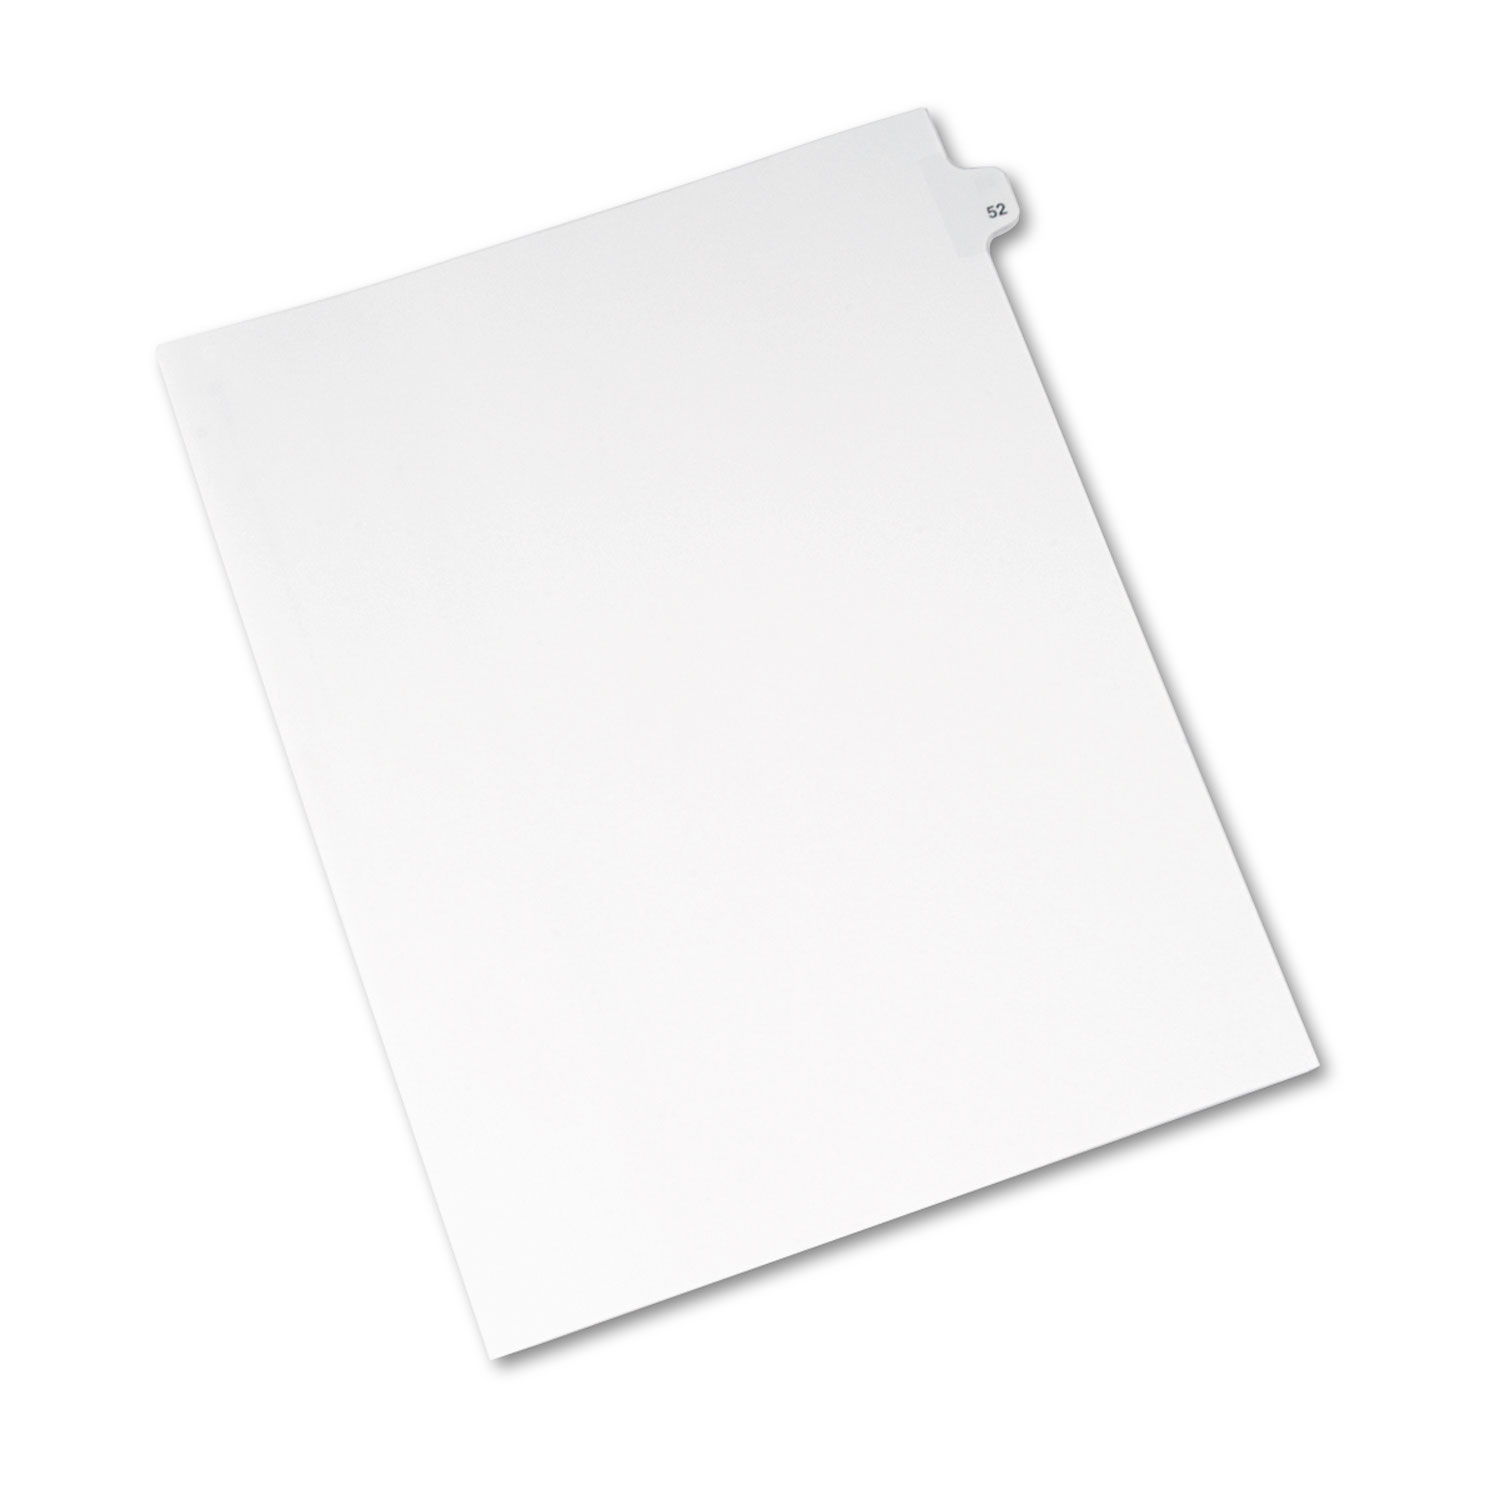 Avery-Style Legal Exhibit Side Tab Divider, Title: 52, Letter, White, 25/Pack